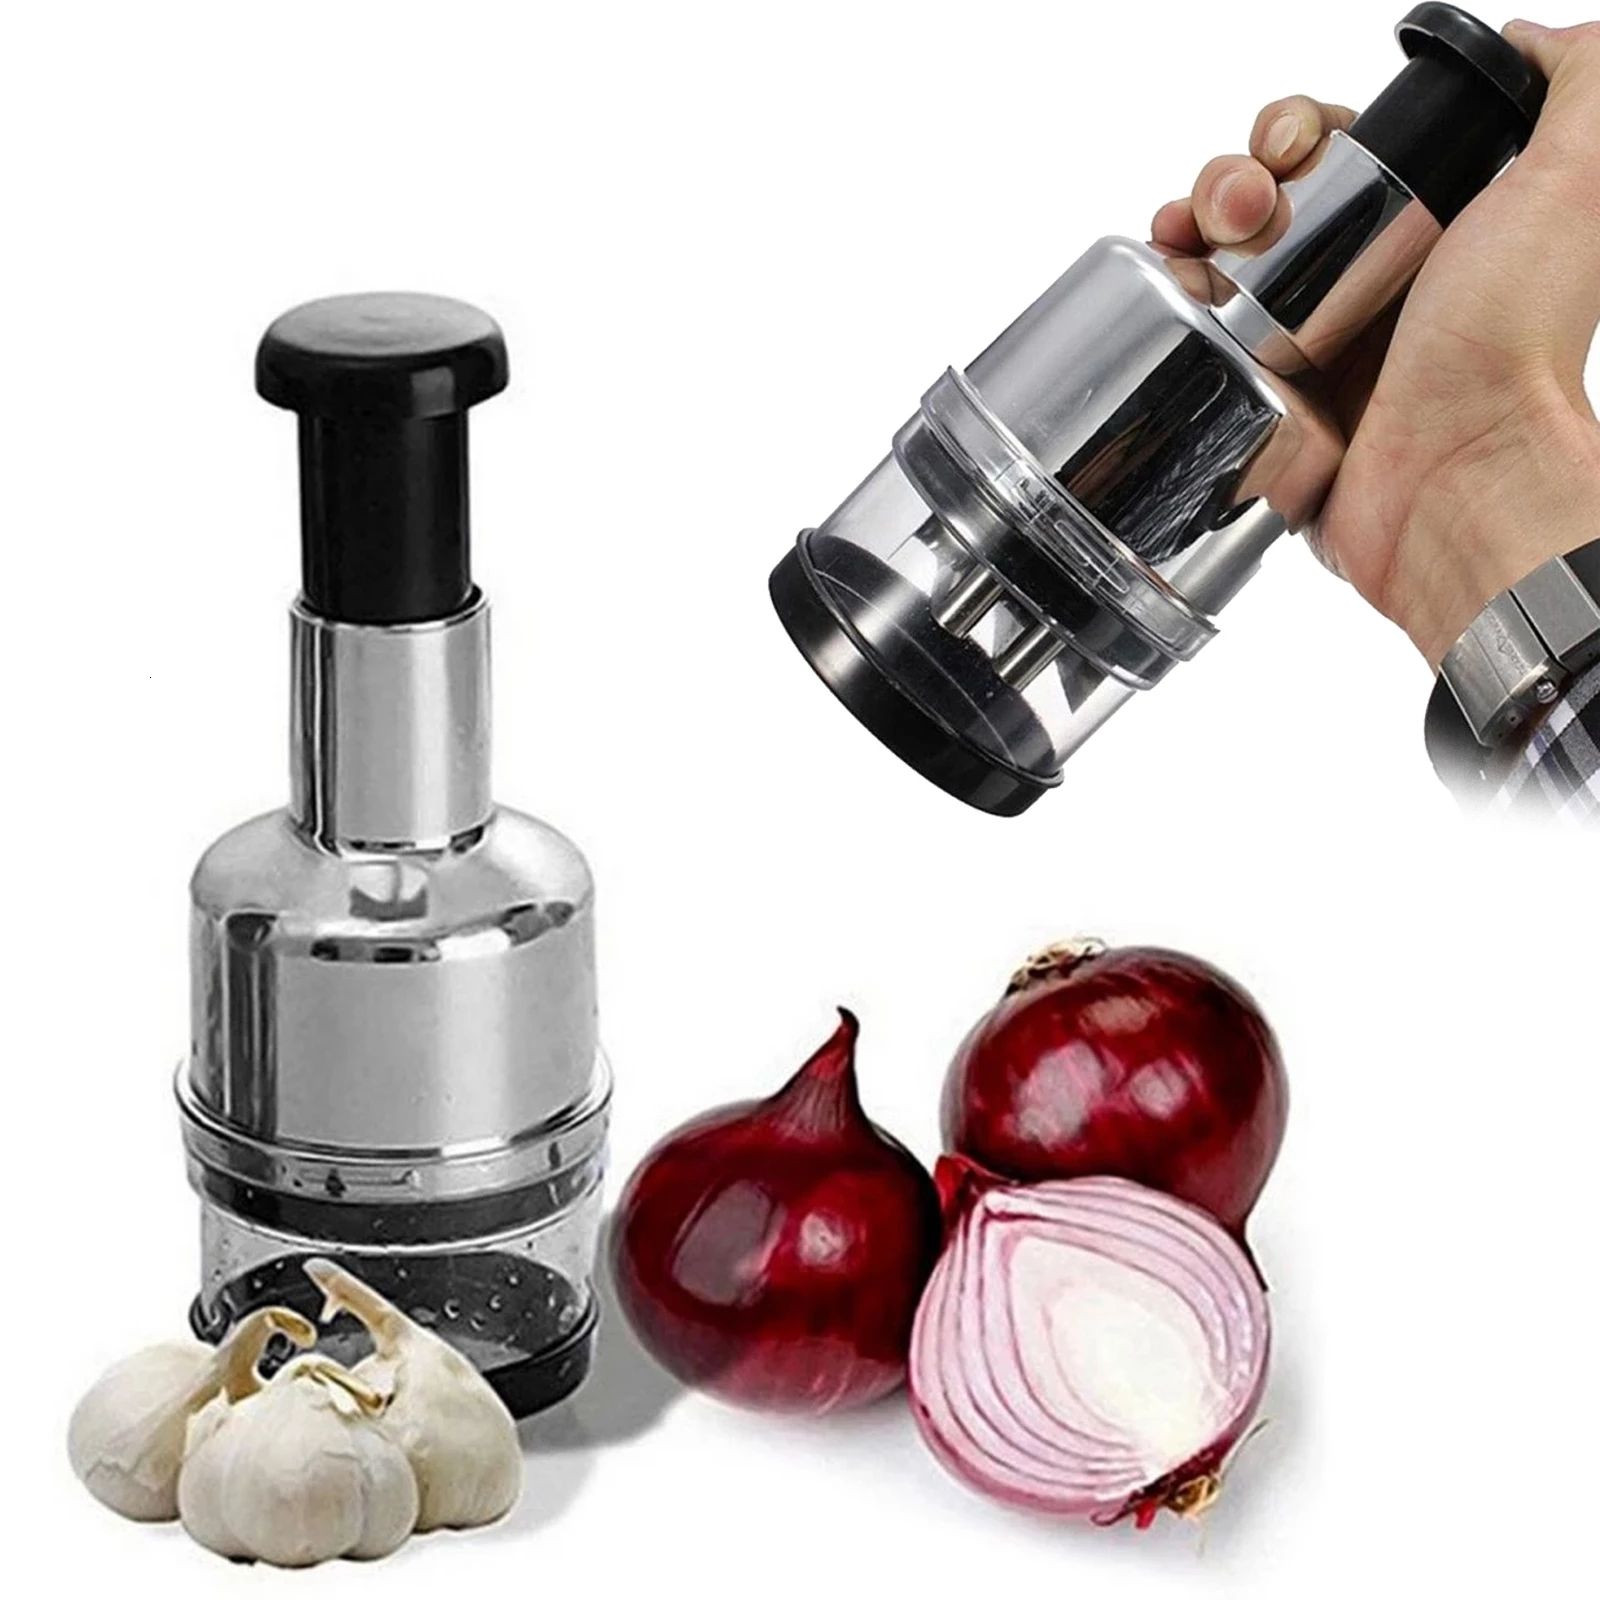 Manual Food Chopper,Garlic Mincer, Kitchen Tools for Chop Vegetables,Onion,Fruits,Nuts,Garlic, Size: 2 Cup, White